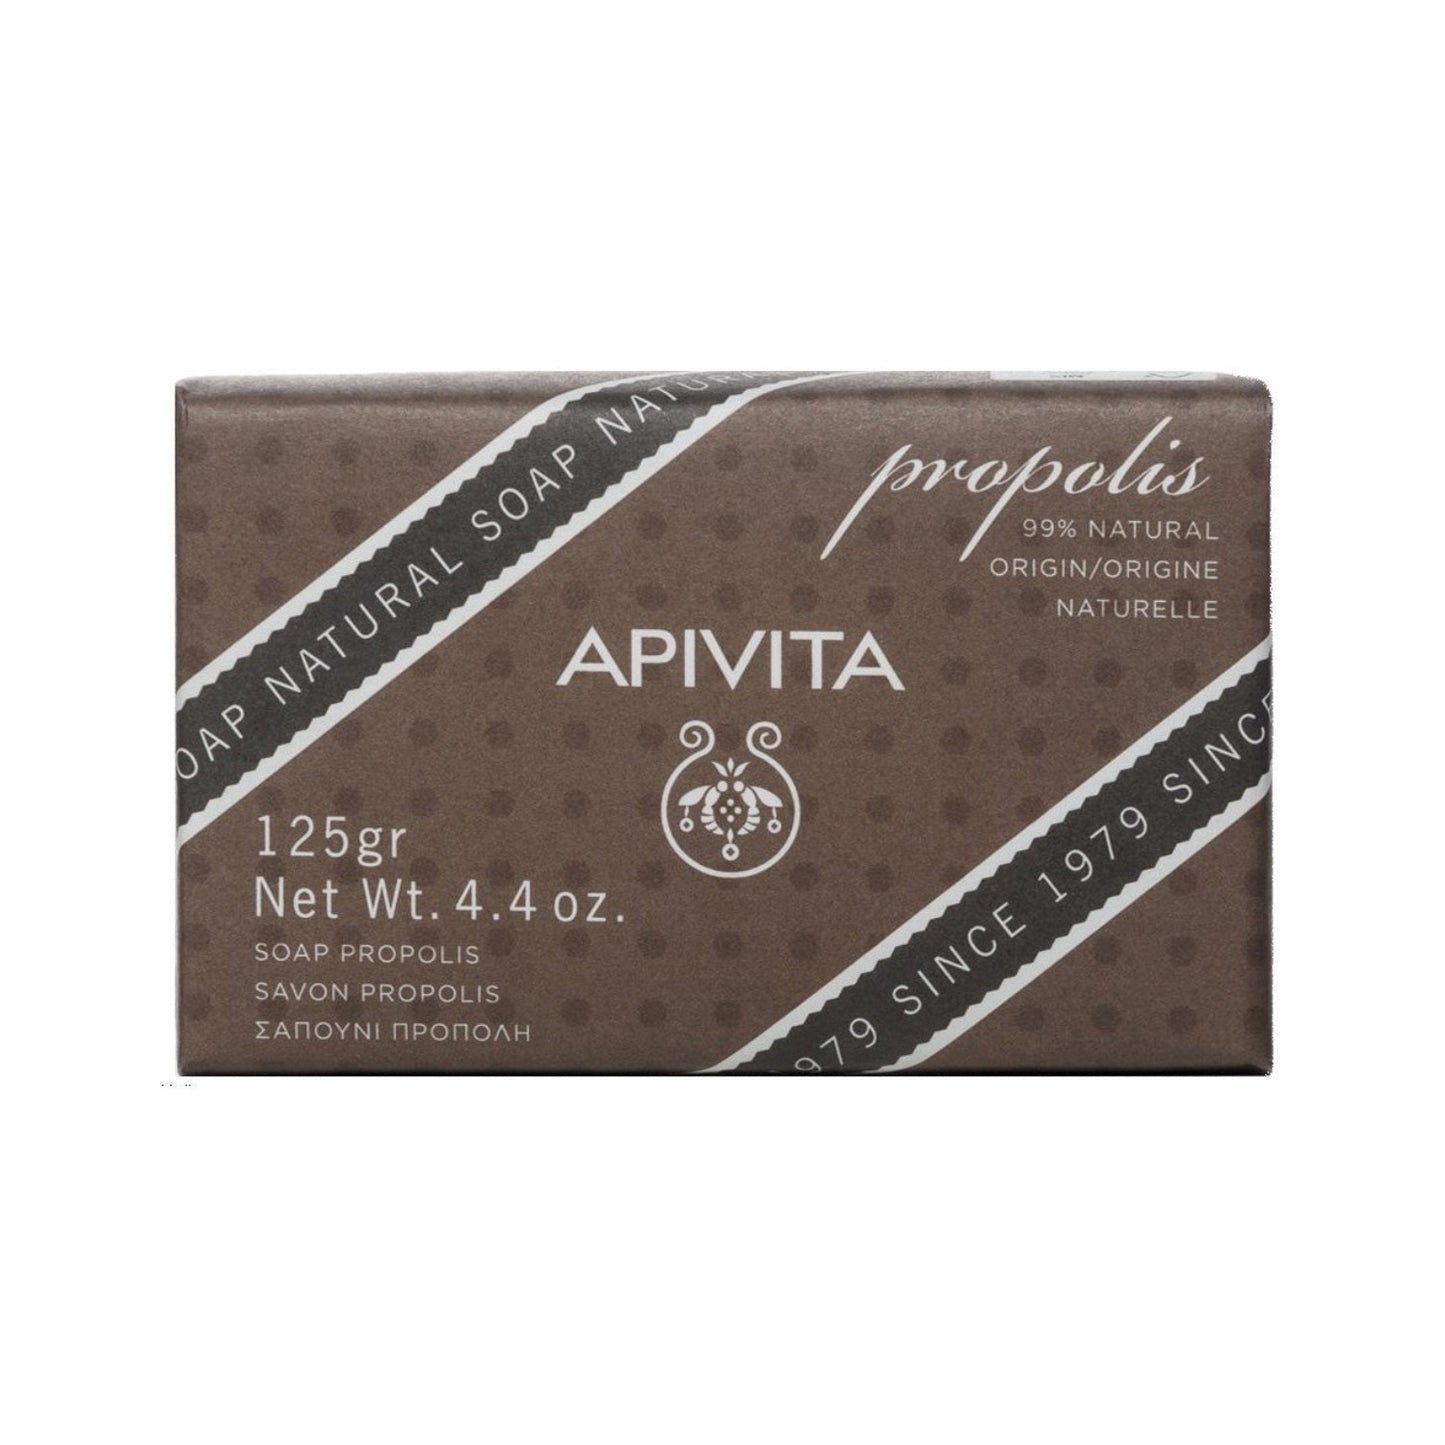 Apivita Propolis Soap with 99% natural origin soap with propolis boasts a unique black colour and is distinguished by its cleansing antiseptic effect on the skin without causing dehydration